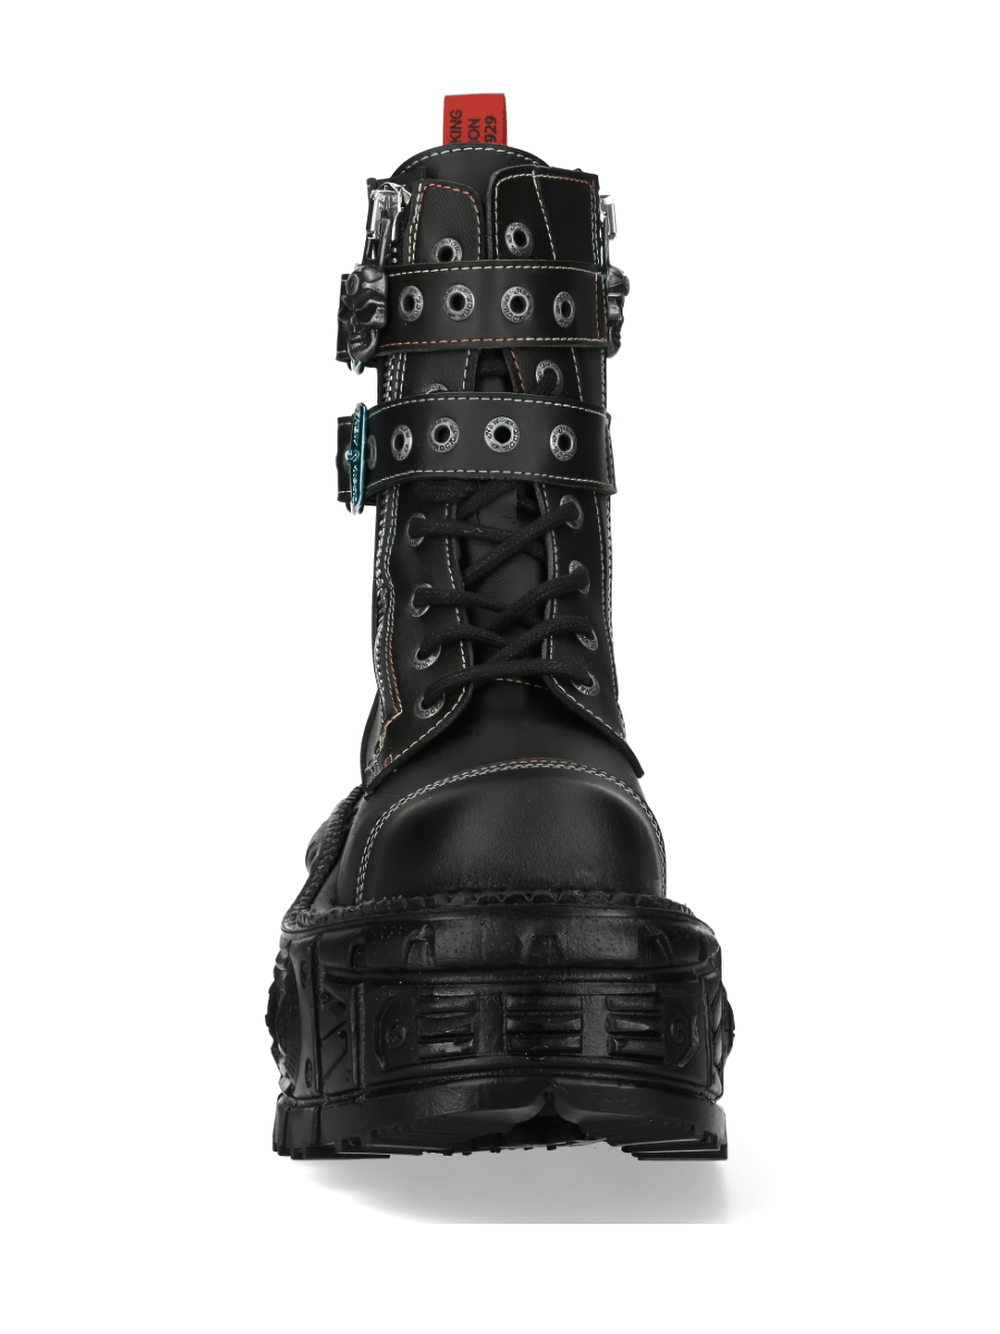 NEW ROCK Gothic Black Ankle Boots with Metallic Buckles